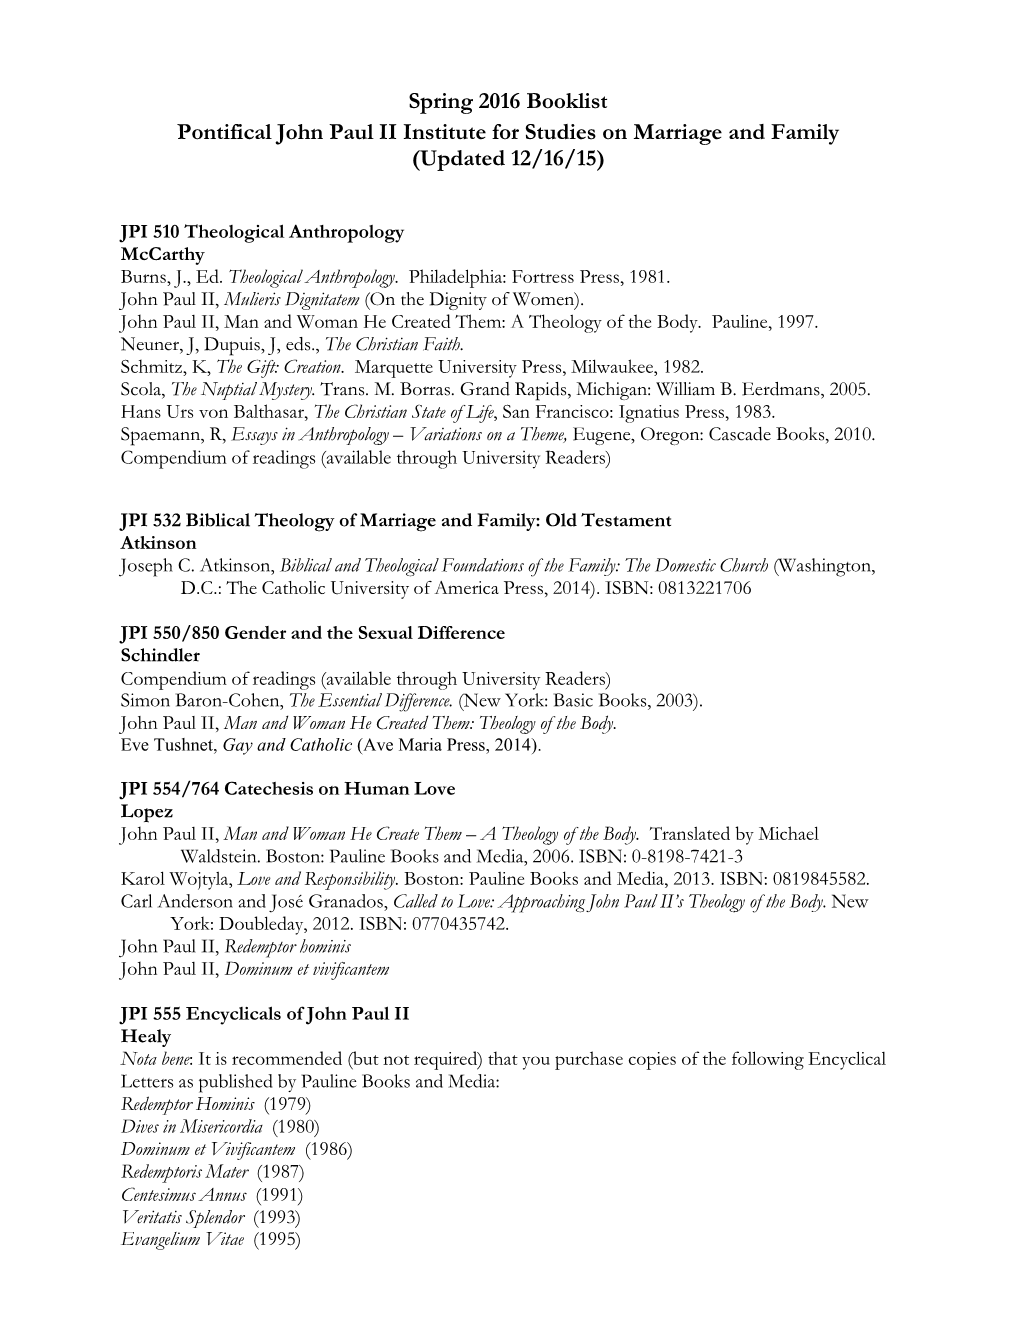 Spring 2016 Booklist Pontifical John Paul II Institute for Studies on Marriage and Family (Updated 12/16/15)